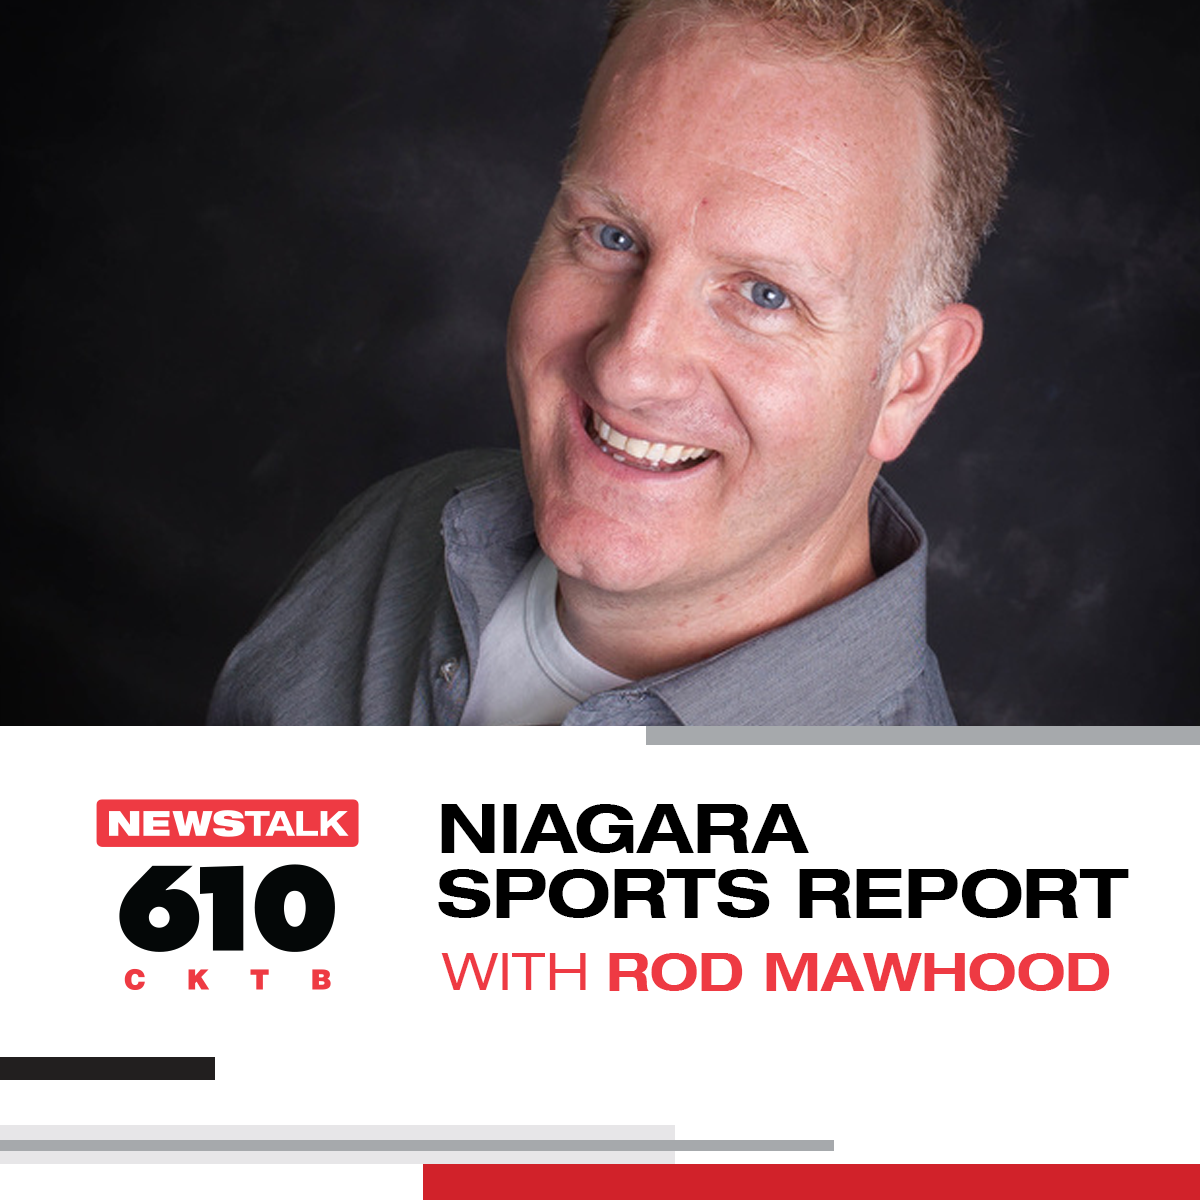 Niagara Sports Report - Mohammed Ahmed - Canada's Most Decorated Distance Runner